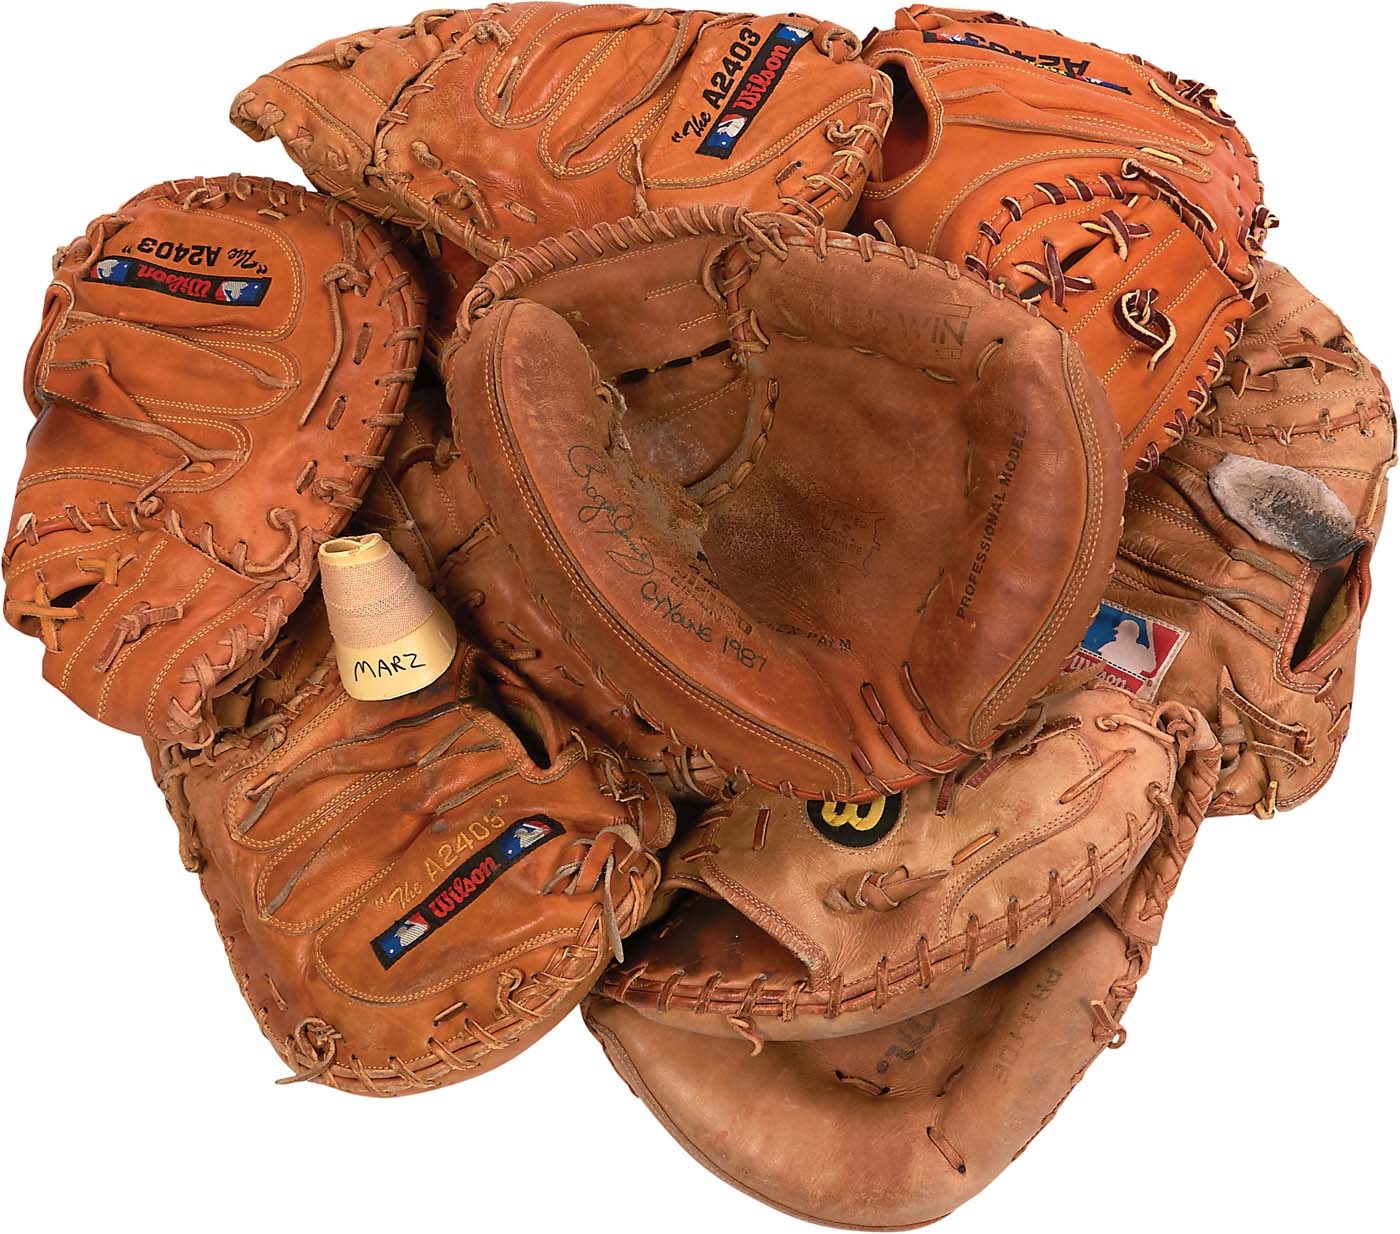 The 1984 USA Baseball Olympian Collection - John Marzano Game Worn Catcher's Mitt Collection w/One "Destroyed" by Roger Clemens (Some Photo-Matched)